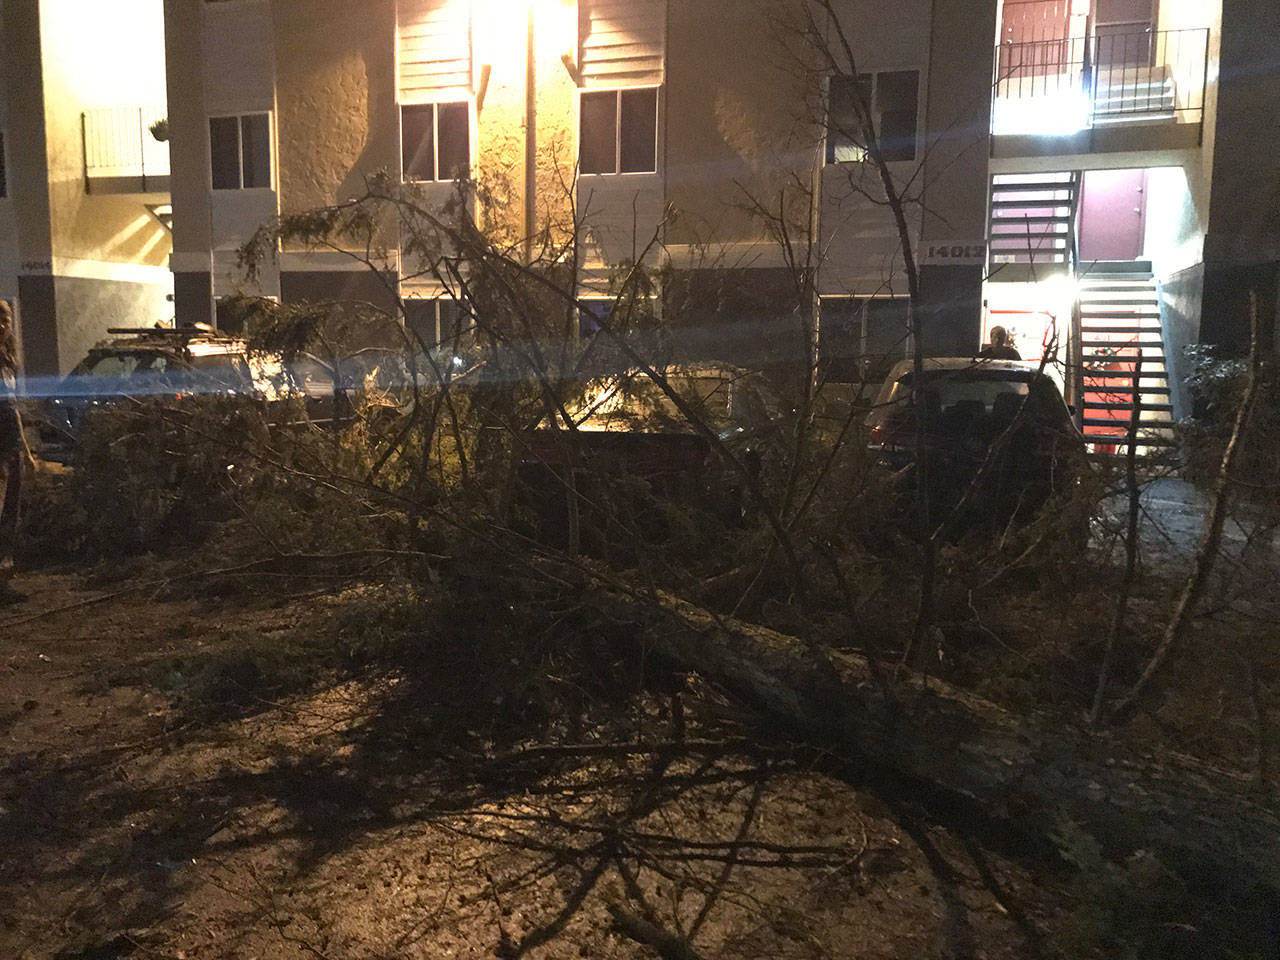 Nobody was hurt when a tree fell in the parking lot of a condominium complex on Finn Hill in Kirkland during a windstorm on Dec. 14. but a few cars suffered some scratches. Samantha Pak/staff photo